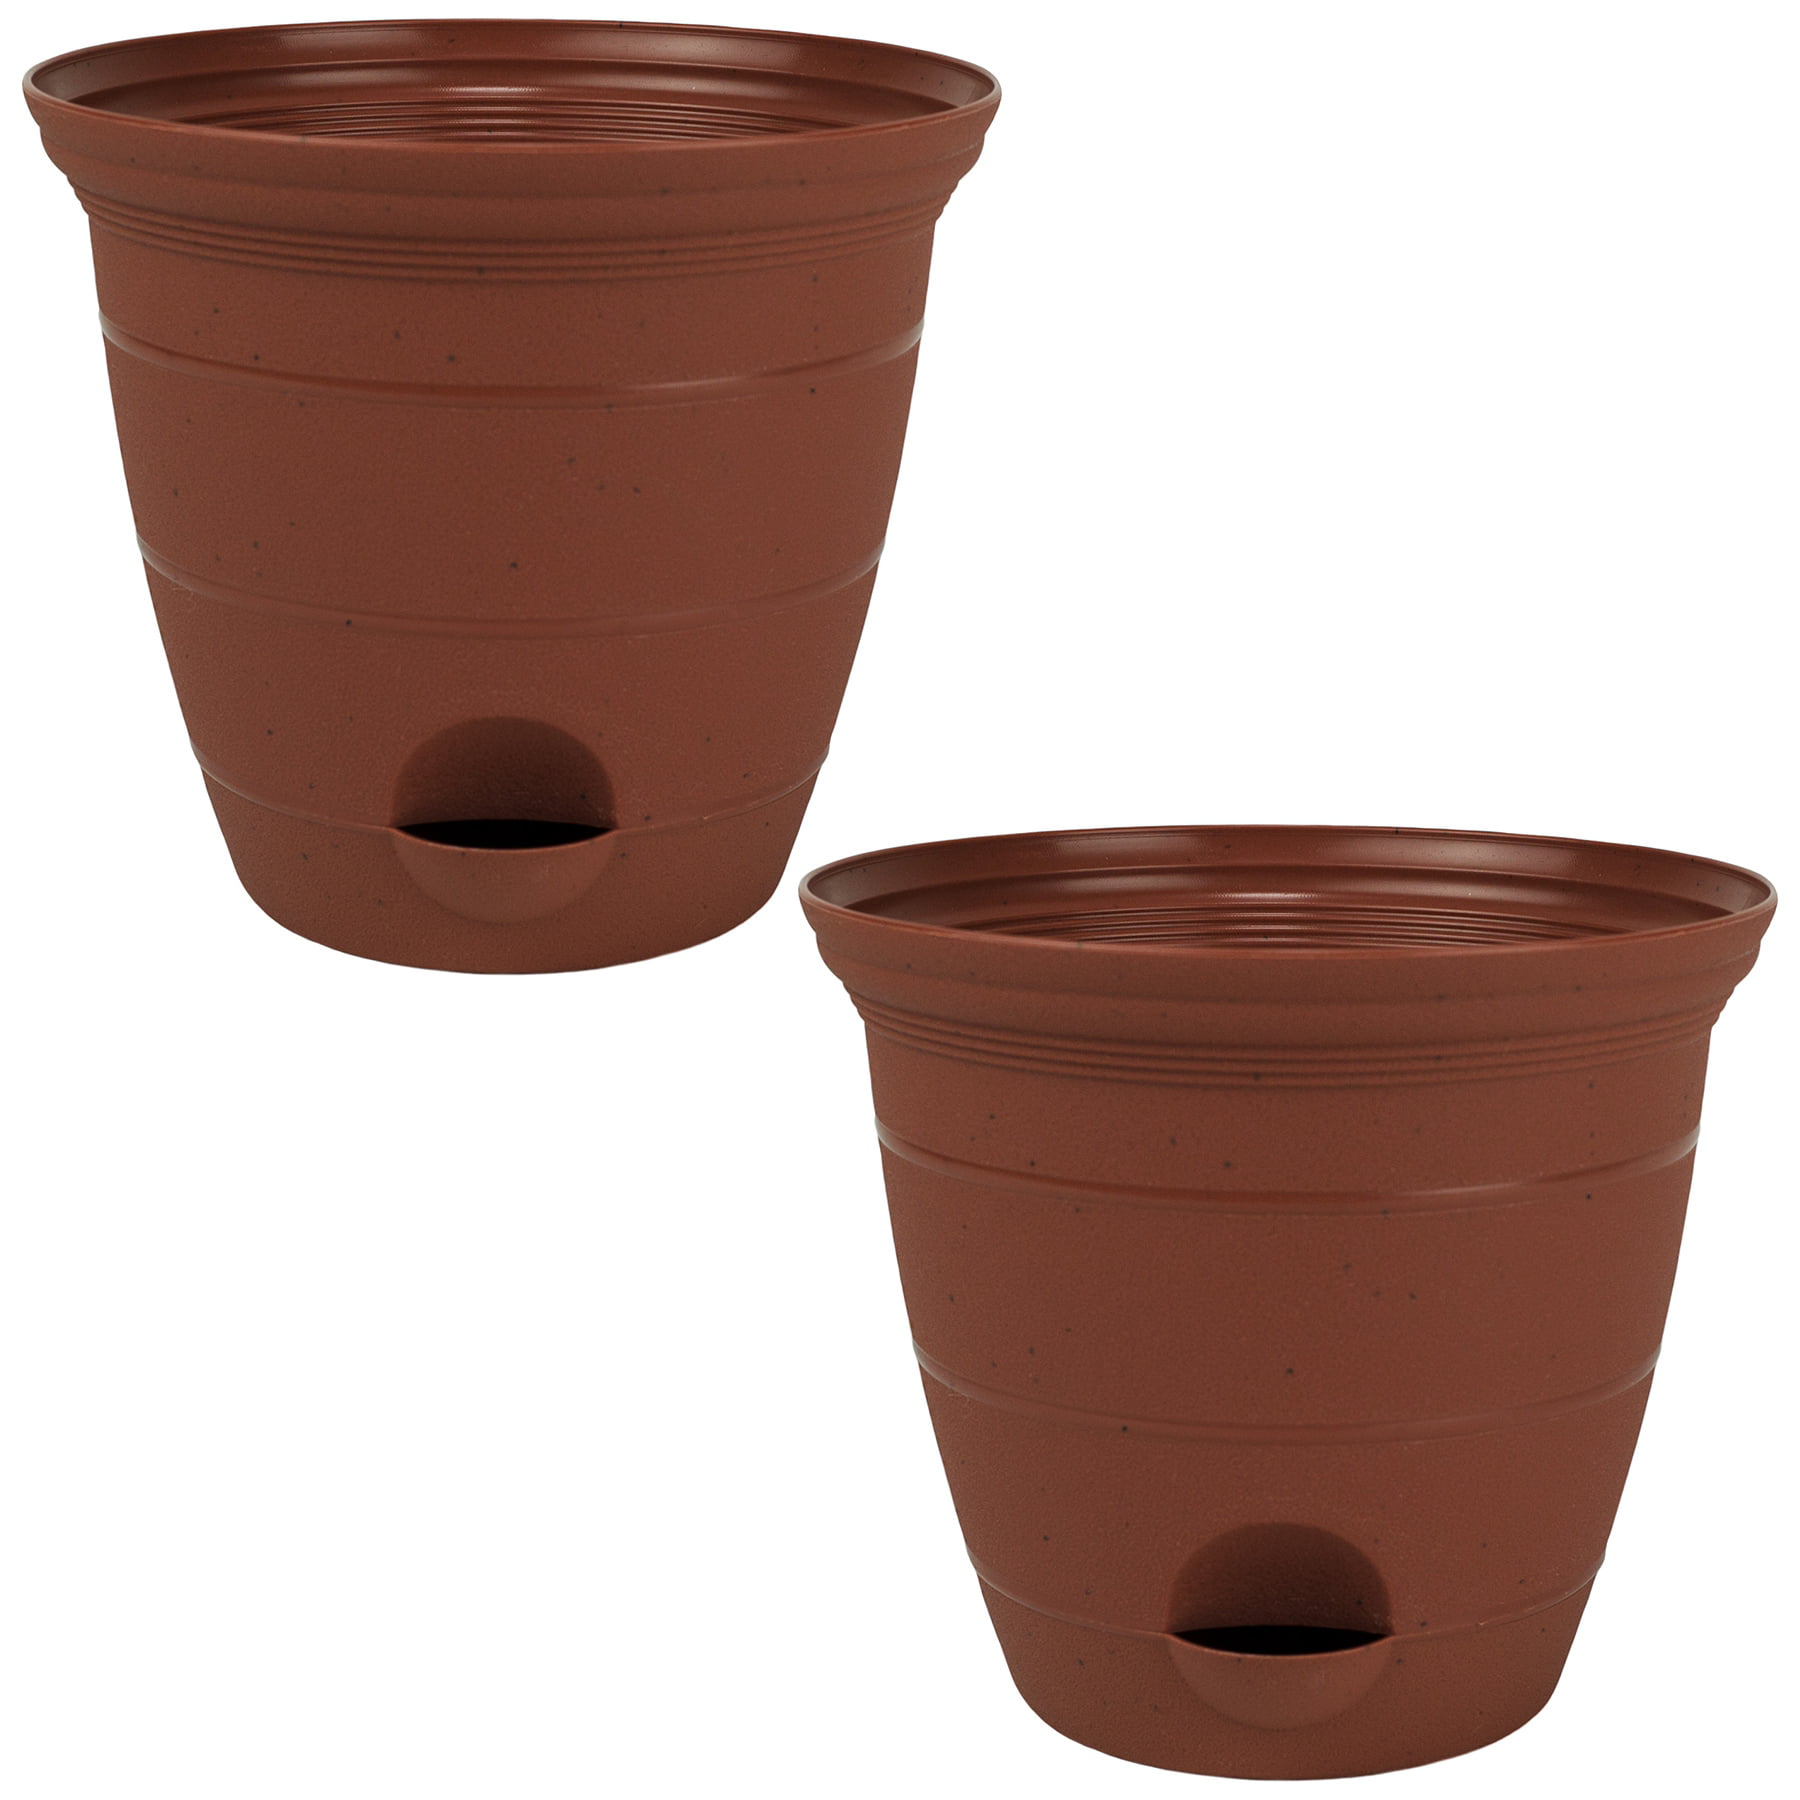 3 pack 8" Plastic Self Watering Flower Plant Pot Garden Potted Planter .75 Gal 